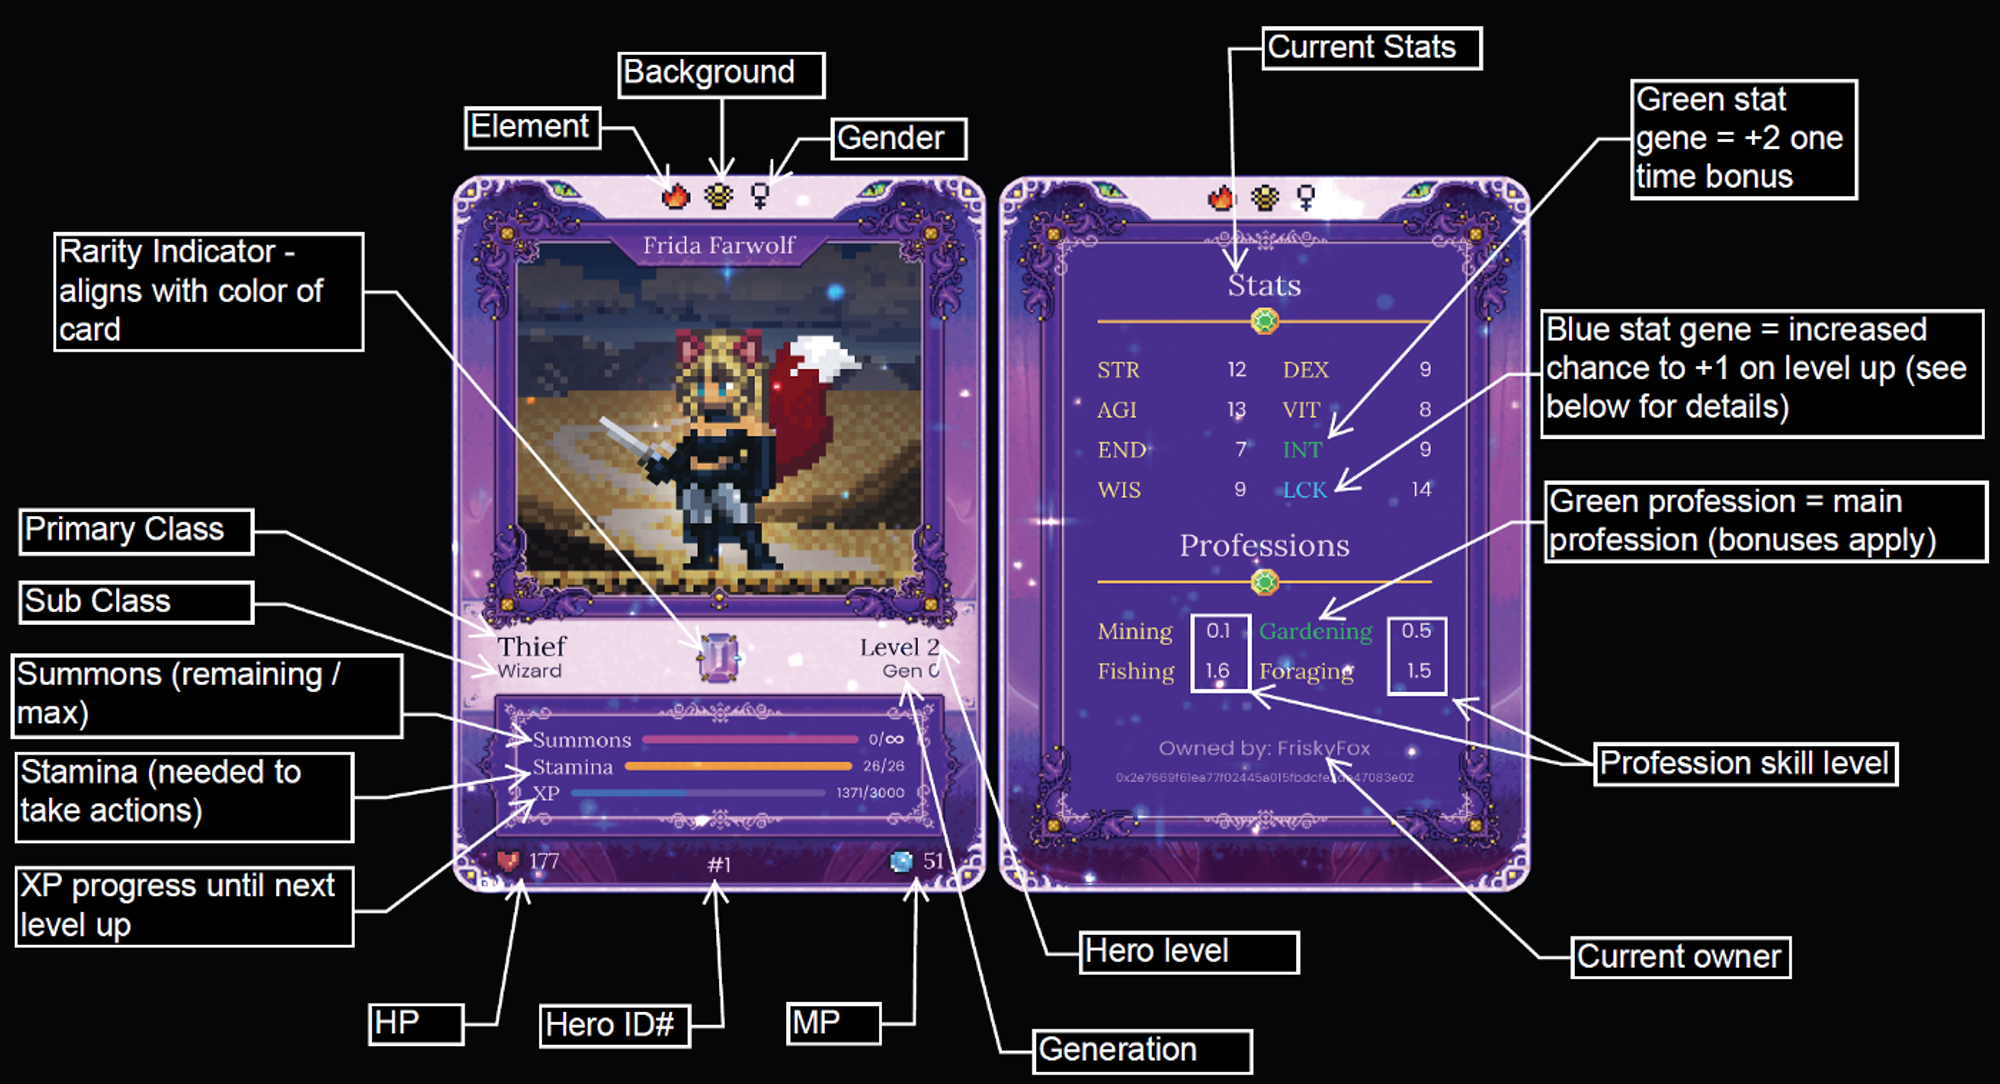 Breakdown and legend of each item shown on the NFT card for a Hero